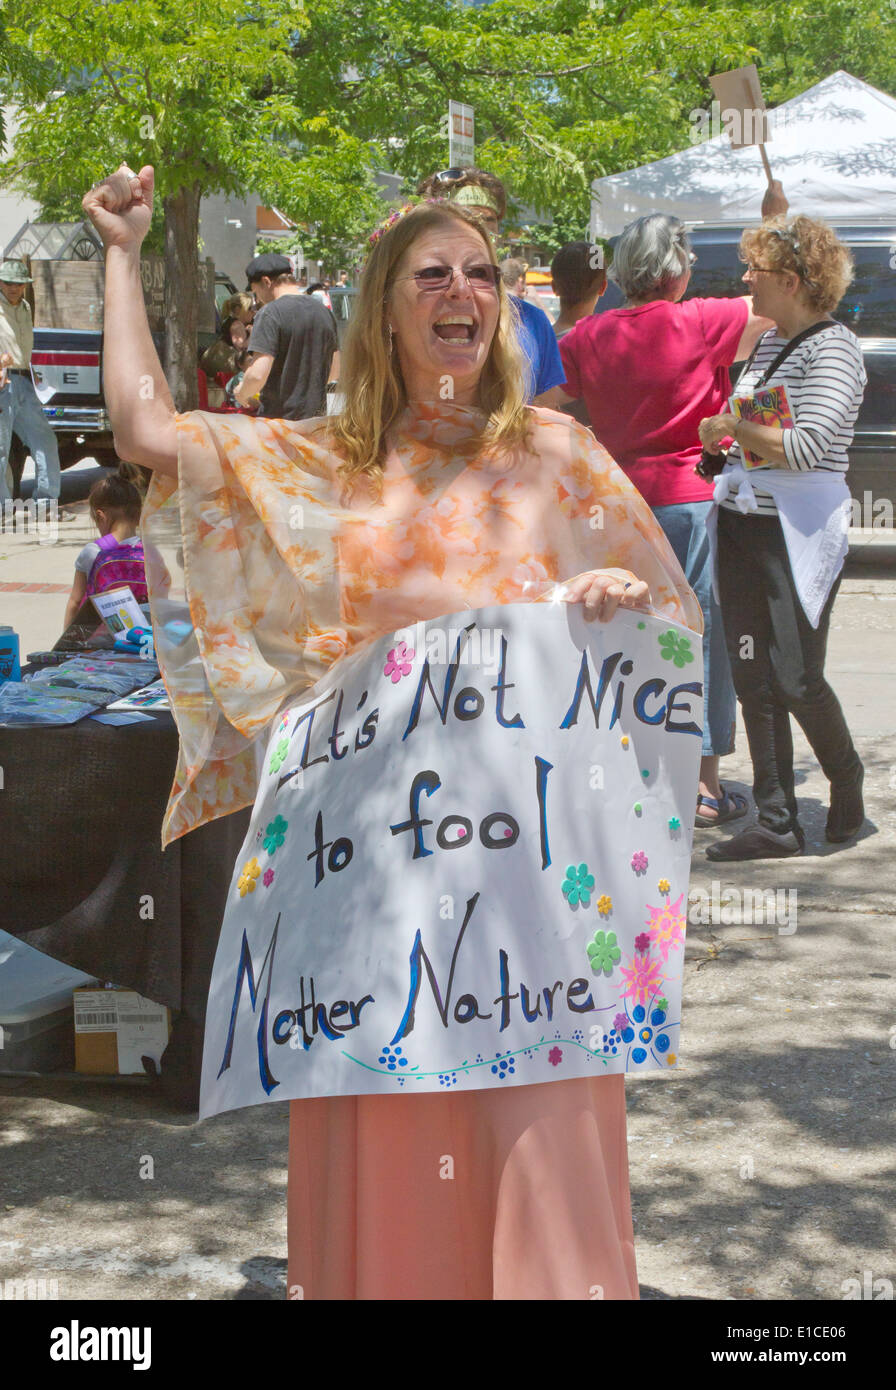 Woman holds a sign saying 'It's Not Nice to Fool Mother Nature!' at a GMO and Monsanto protest rally in Asheville, NC Stock Photo